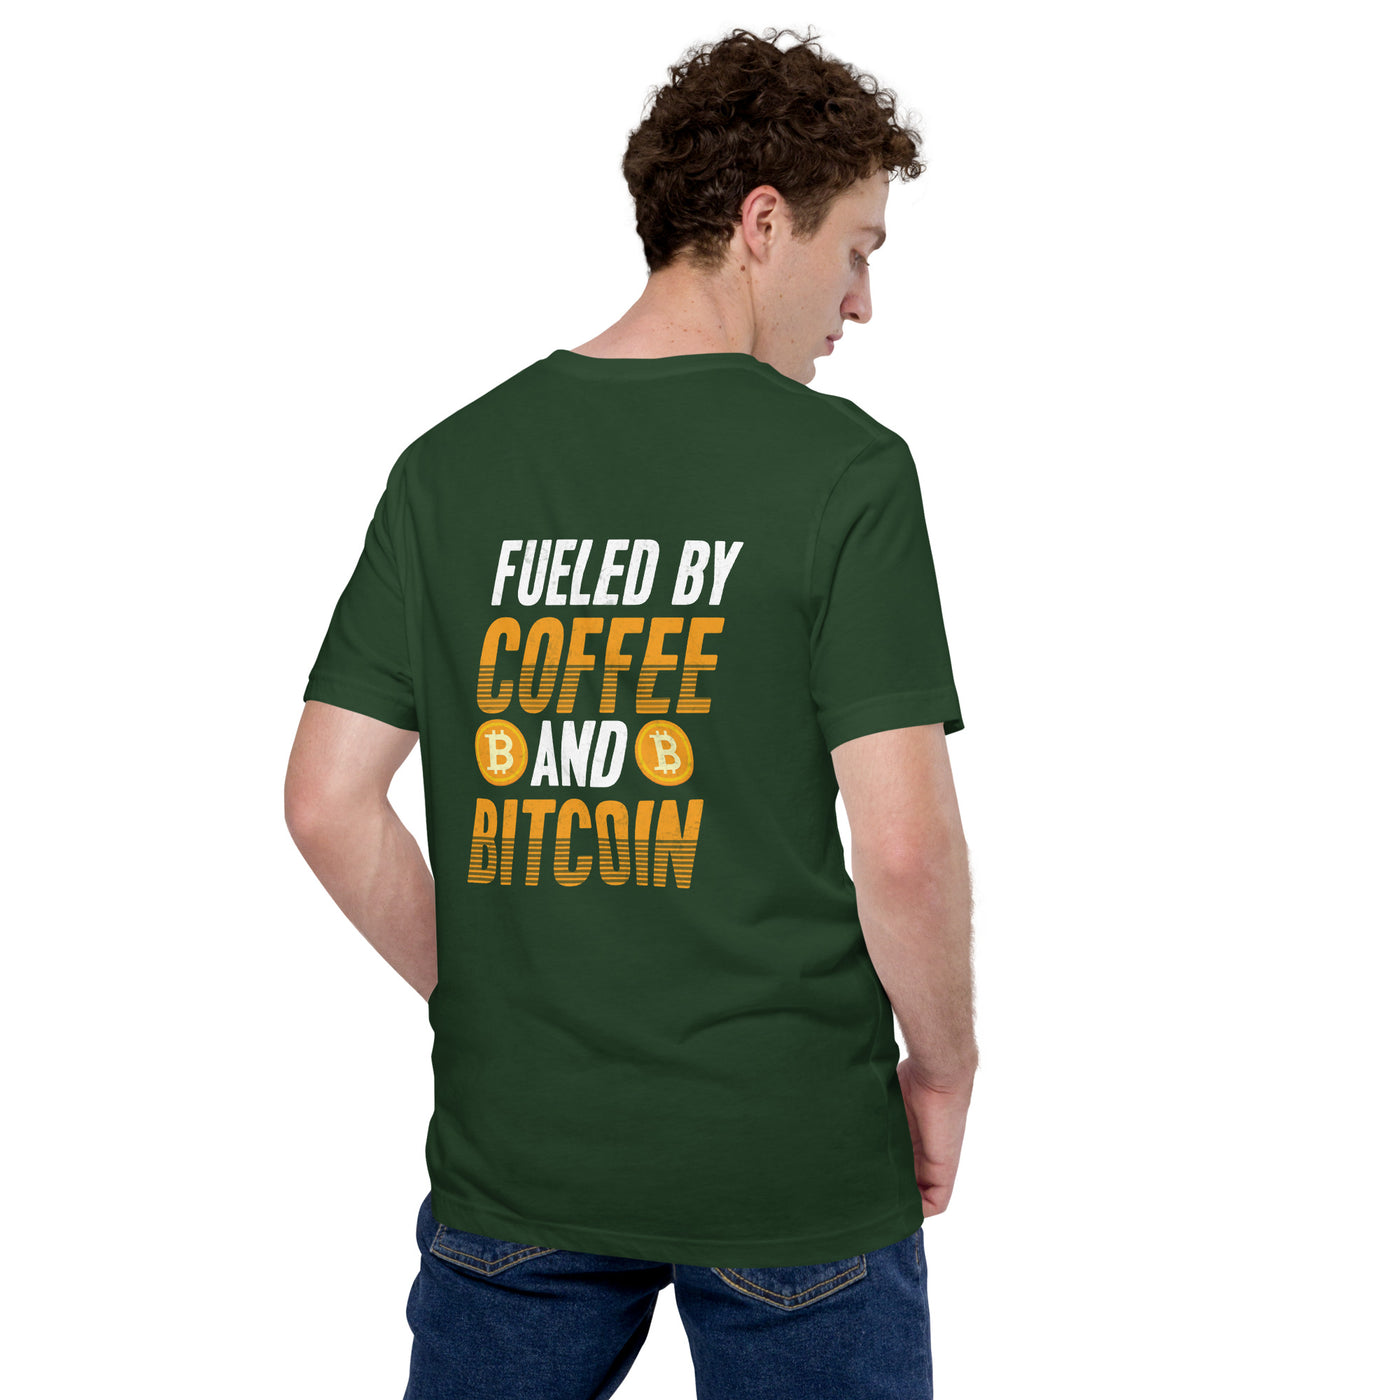 Fueled by Coffee and Bitcoin - Unisex t-shirt ( Back Print )